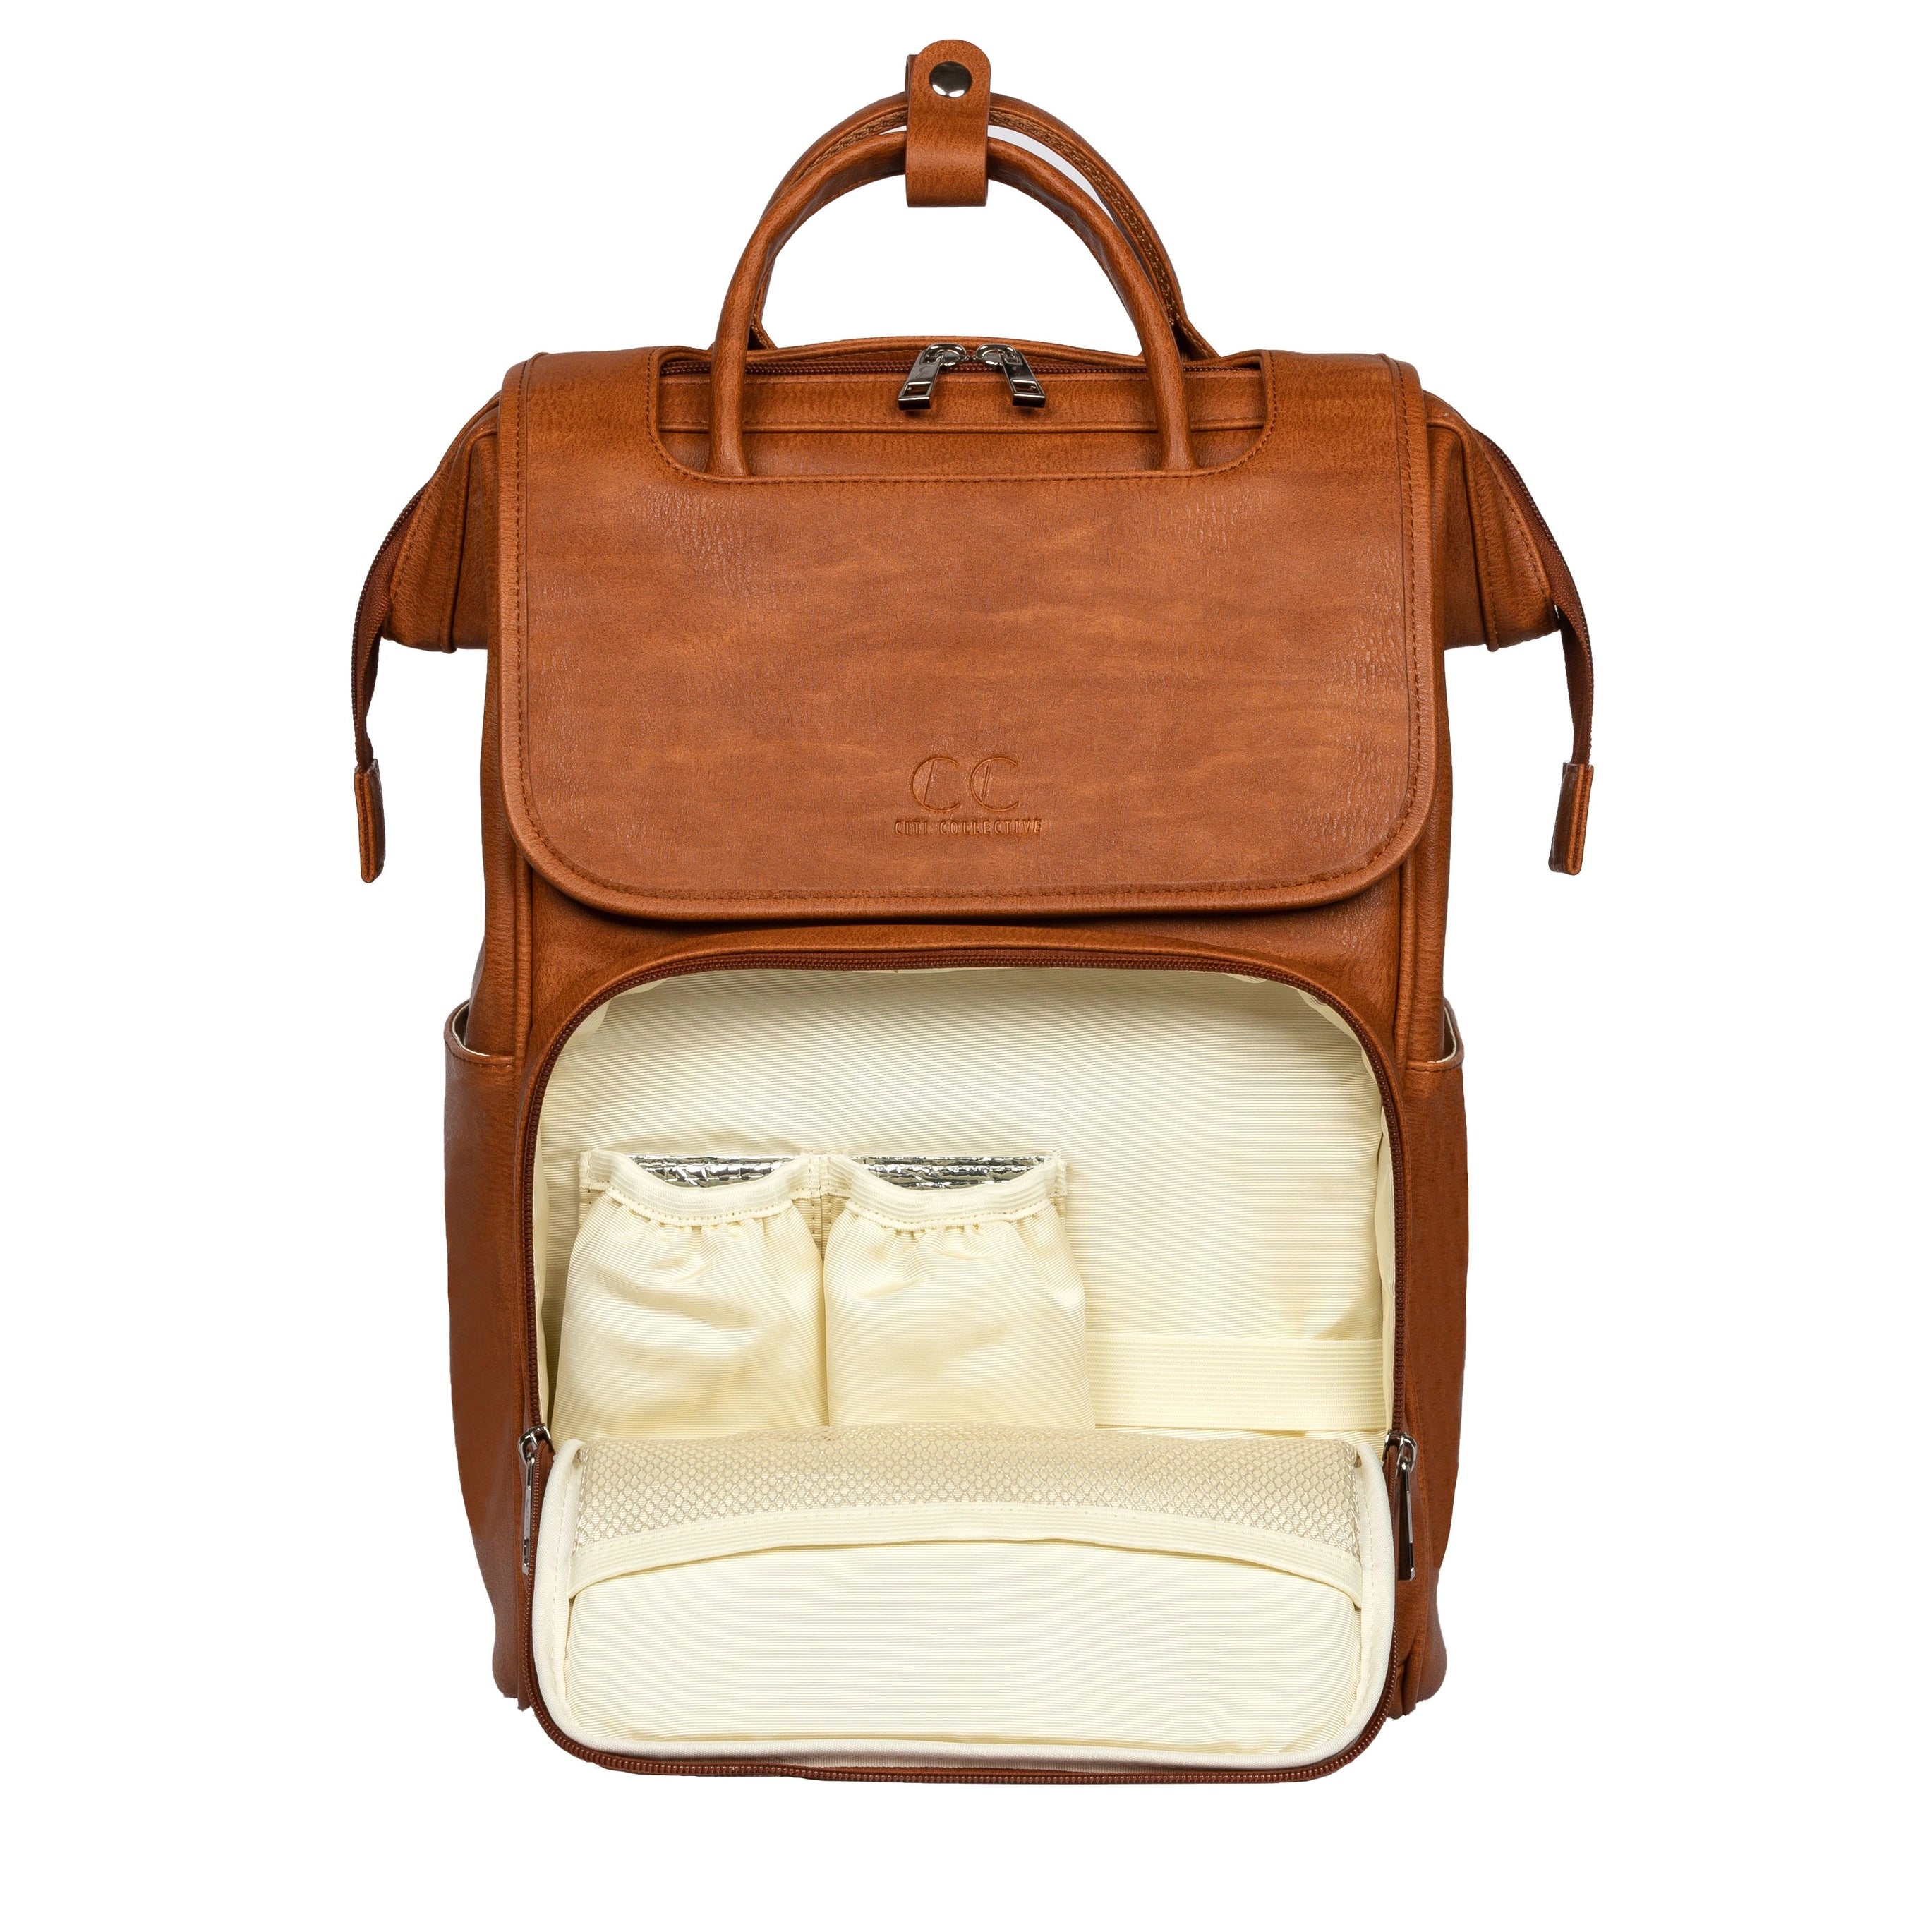 Collette Hybrid Leather Diaper Bag in Caramel, Made in Italy - Alise Design